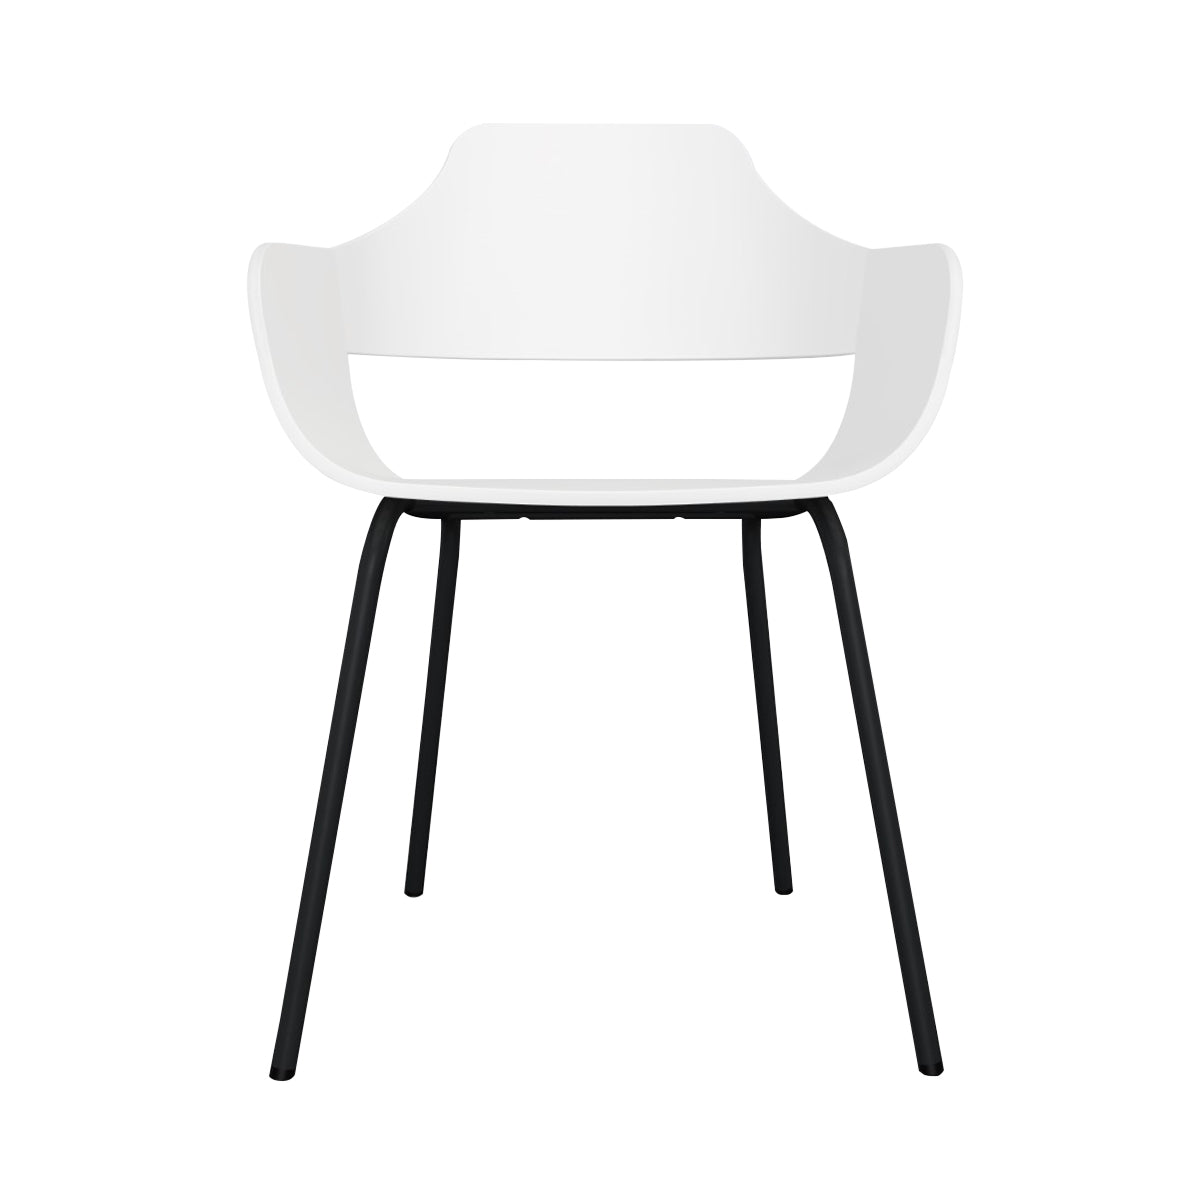 Showtime Chair with Metal Base: Lacquered White + Anthracite Grey